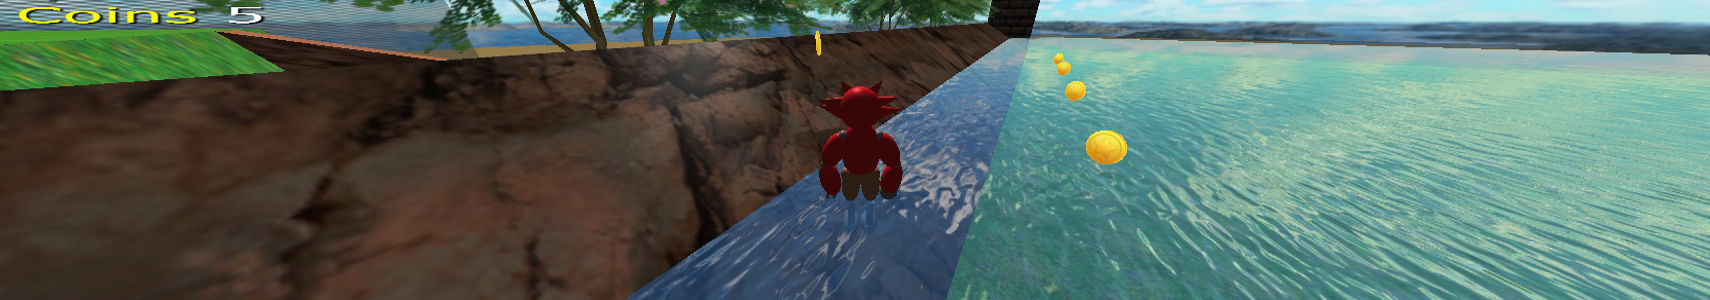 Game creator - Game maker 3D for Android - Download